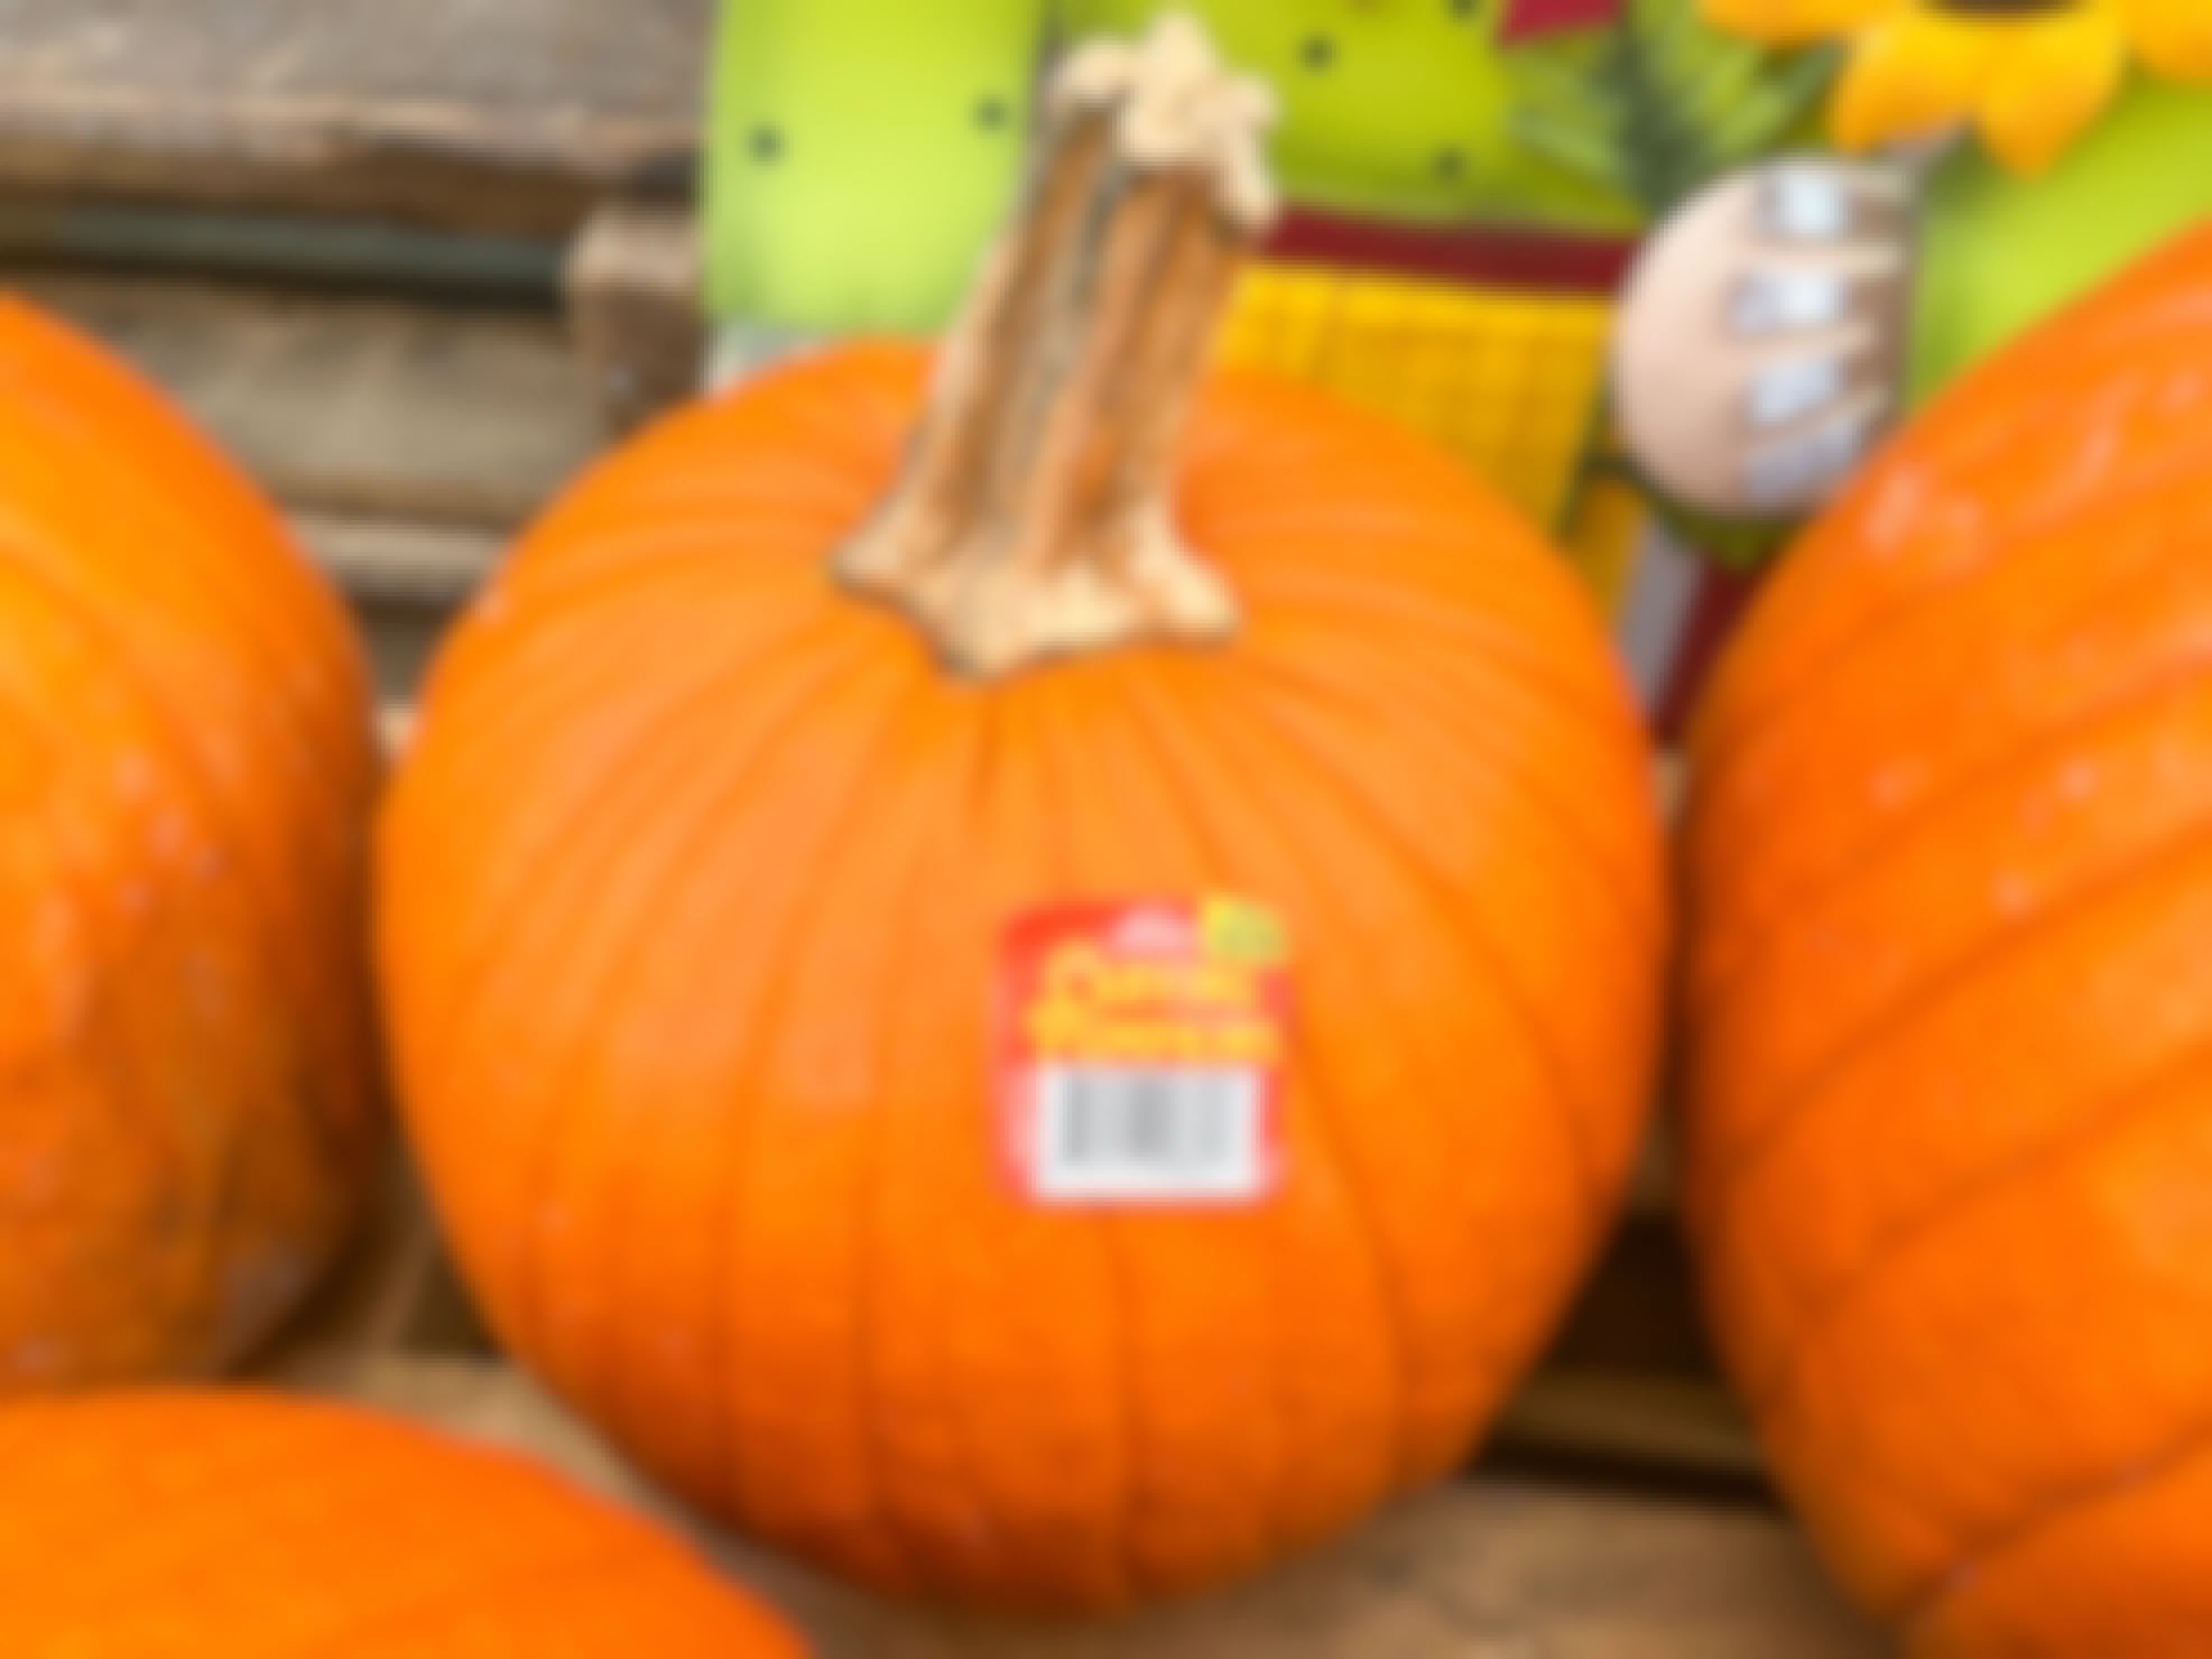 A carving pumpkin on a display outside of Lowe's with a $8.98 price tag